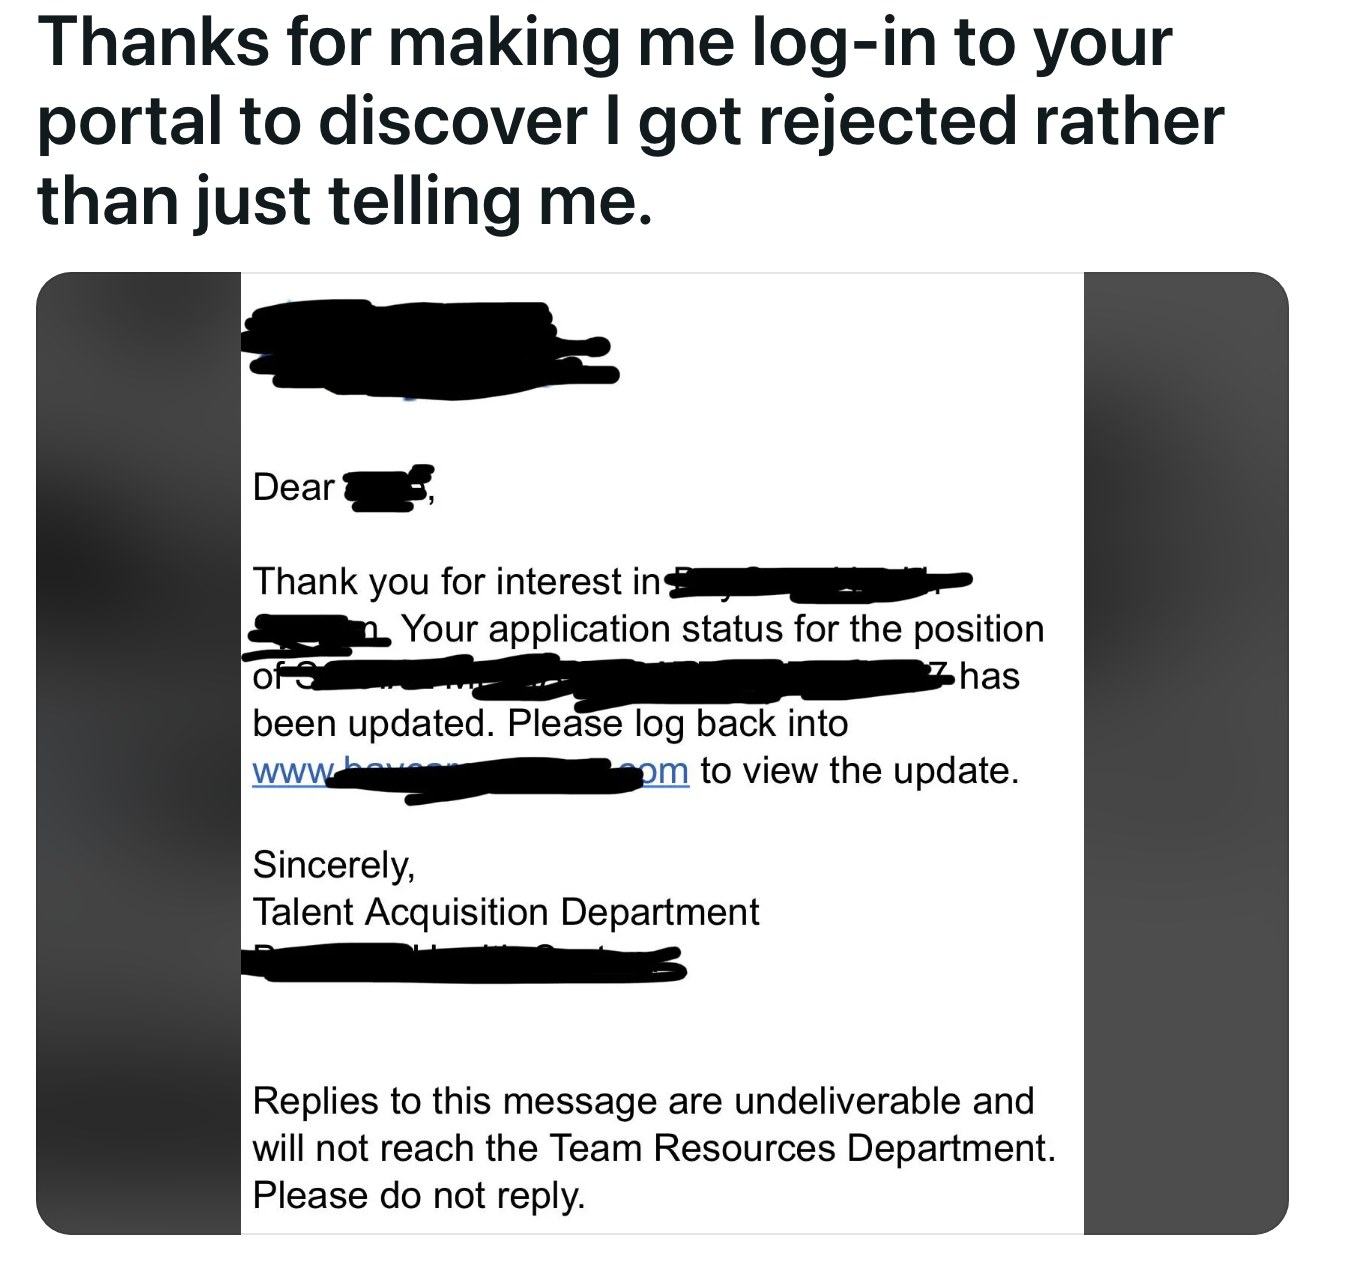 An automated email tells someone their application status has been updated and to log in to access it; after doing so, it says they didn&#x27;t get the job